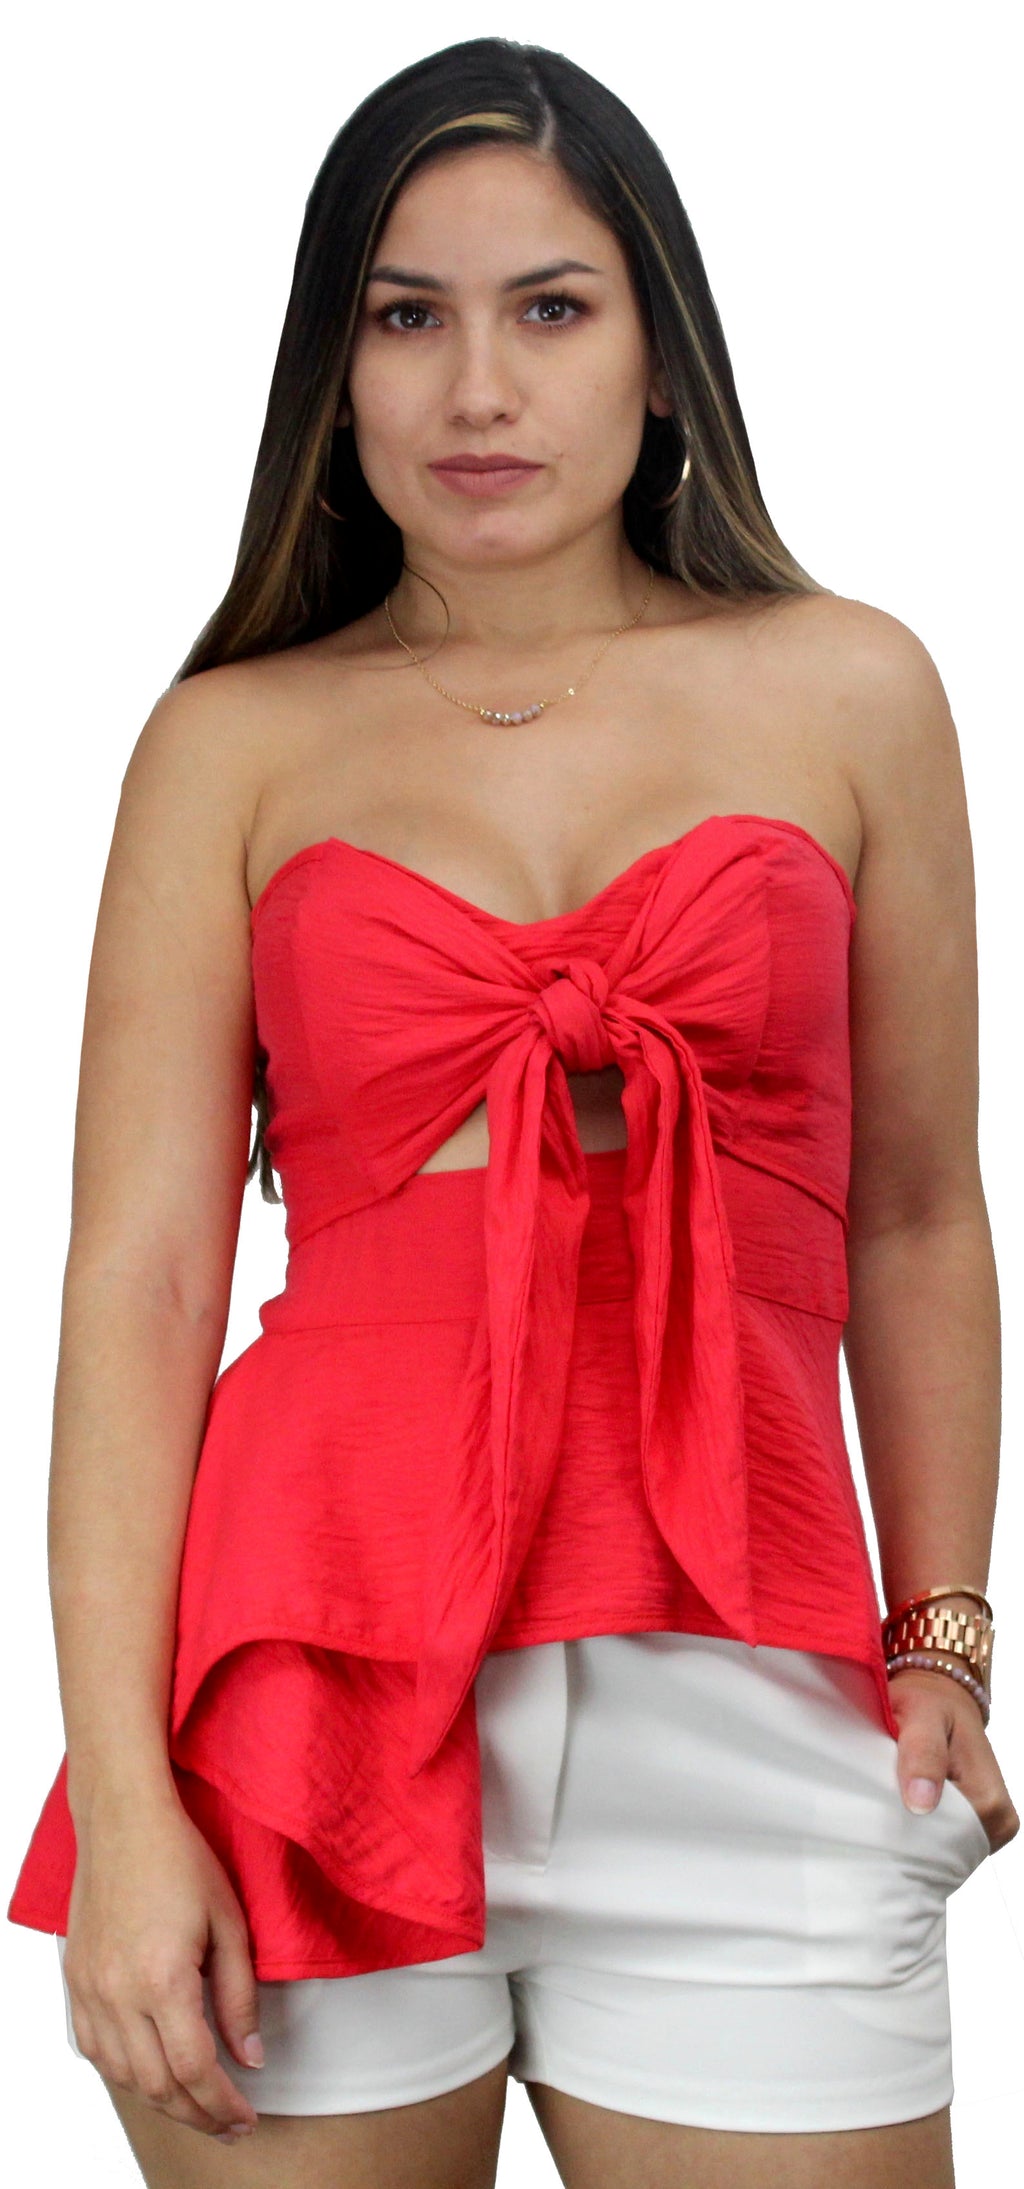 Like You Strapless Red Peplum Top